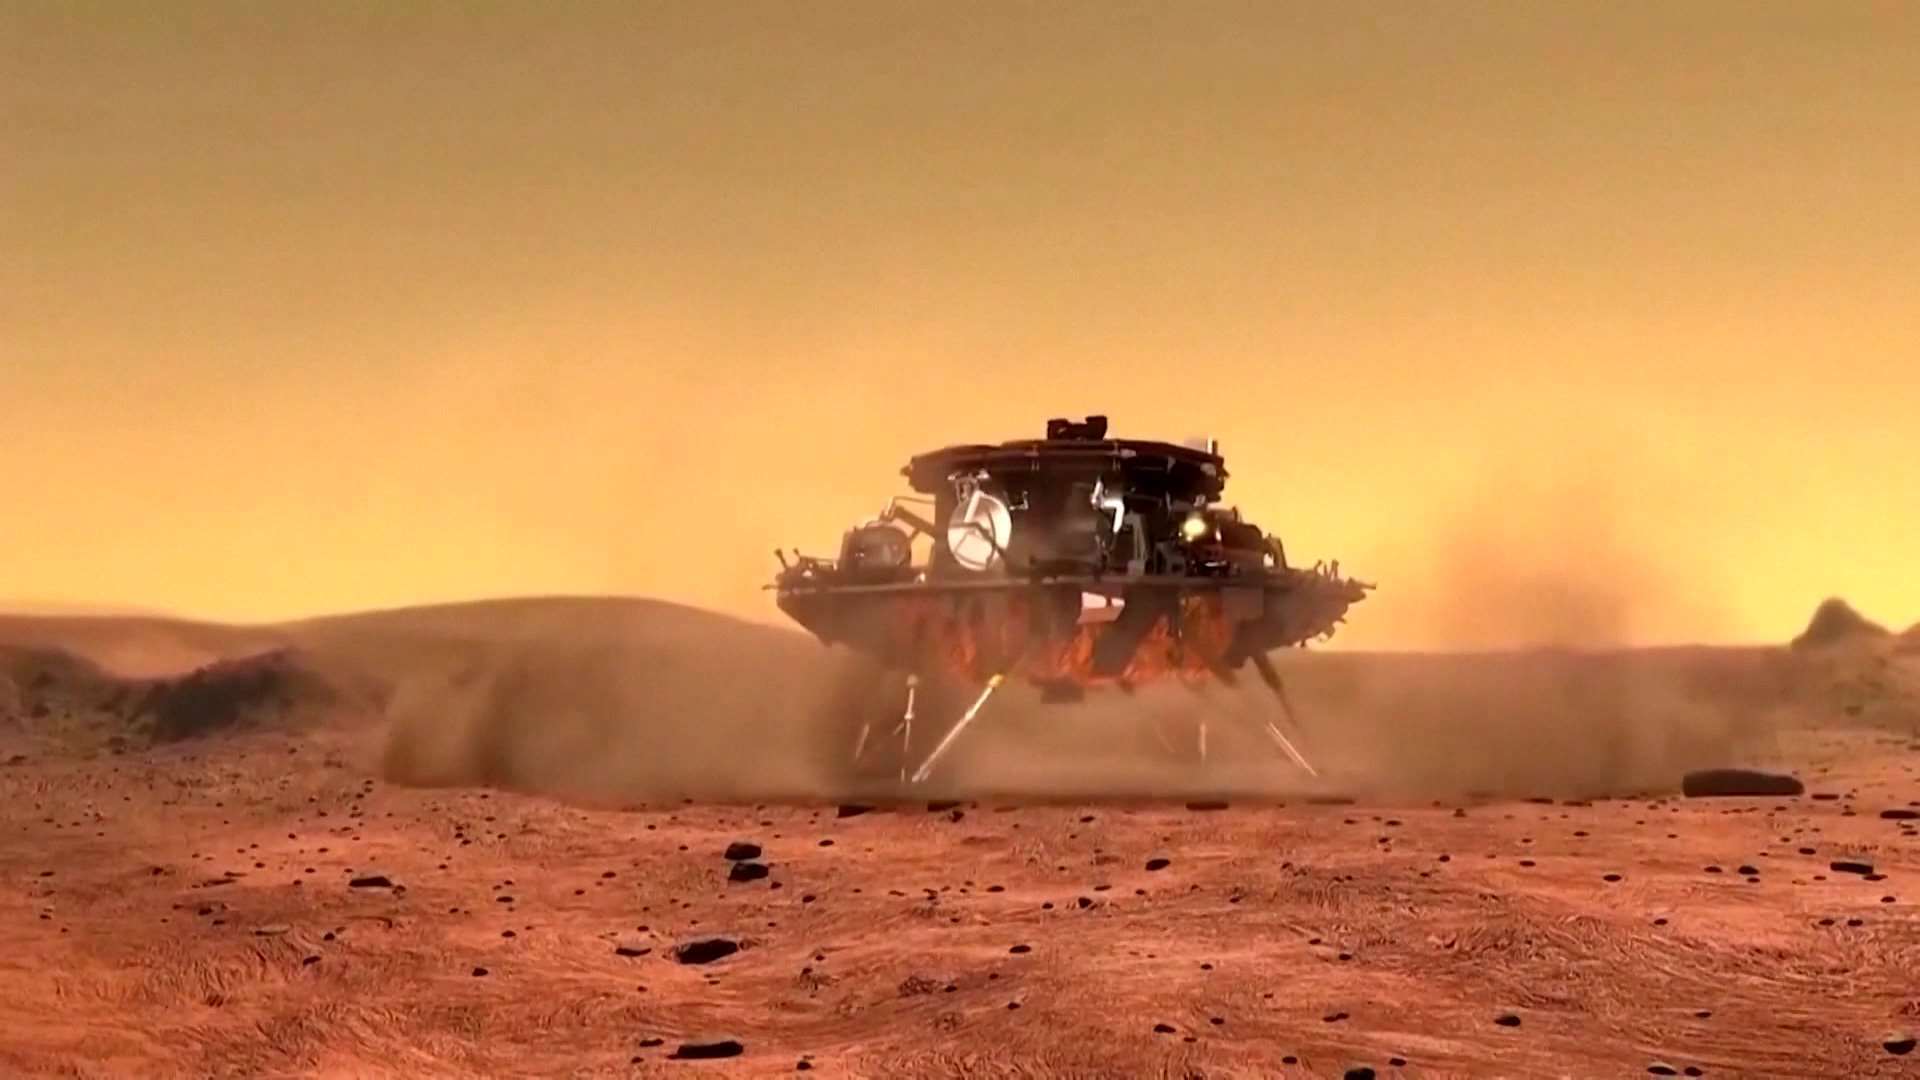 The Chinese Mars rover Zhurong has reached the red planet